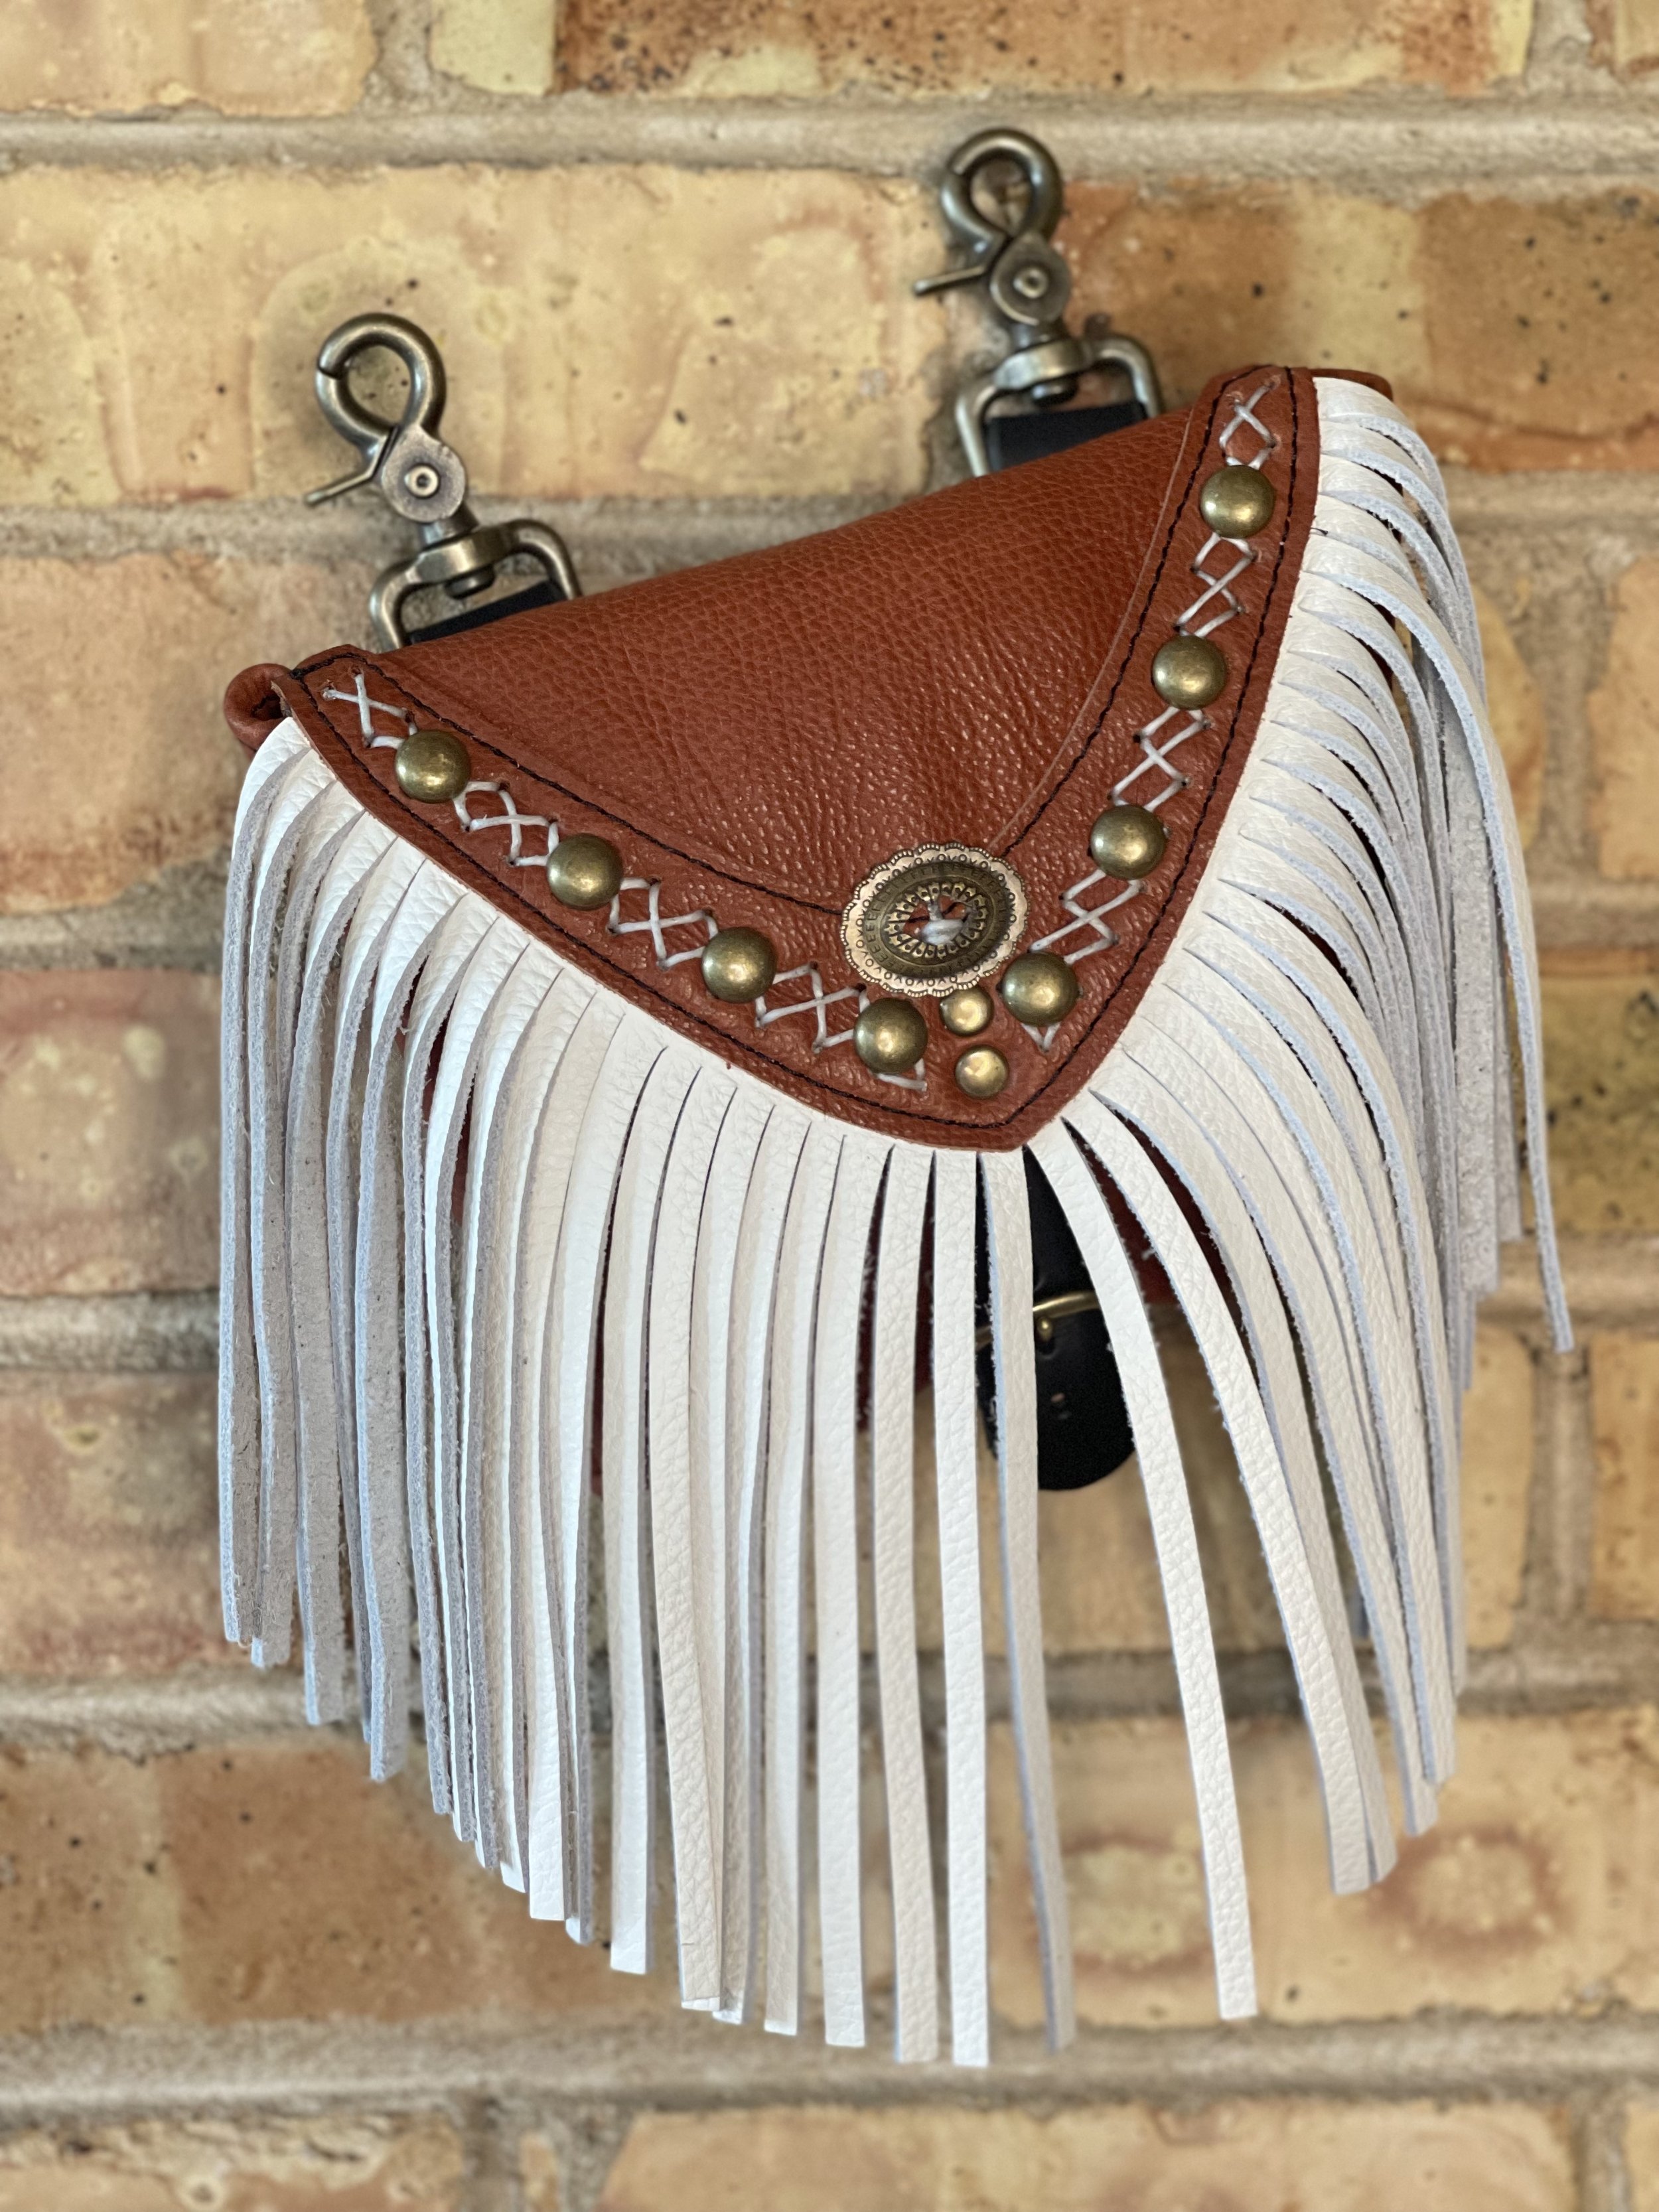 On The Road Hip Bag in Tobacco Bison, White Fringe, White Criss Cross Handstitching, Studs, and a Concho